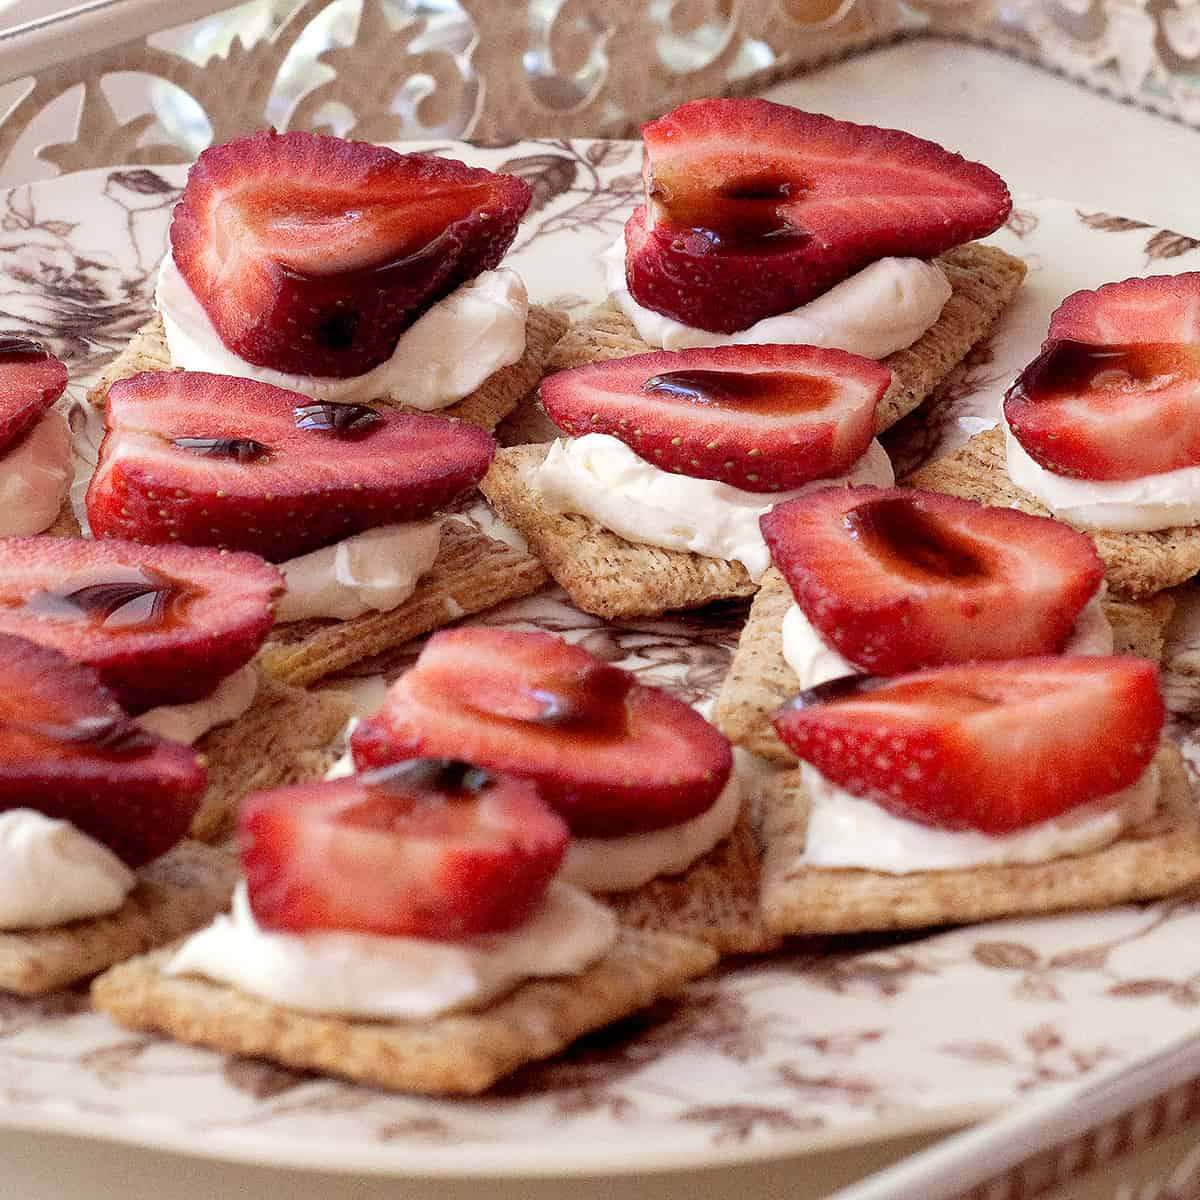 Strawberry slices with balsamic vinegar and cream cheese on crackers.